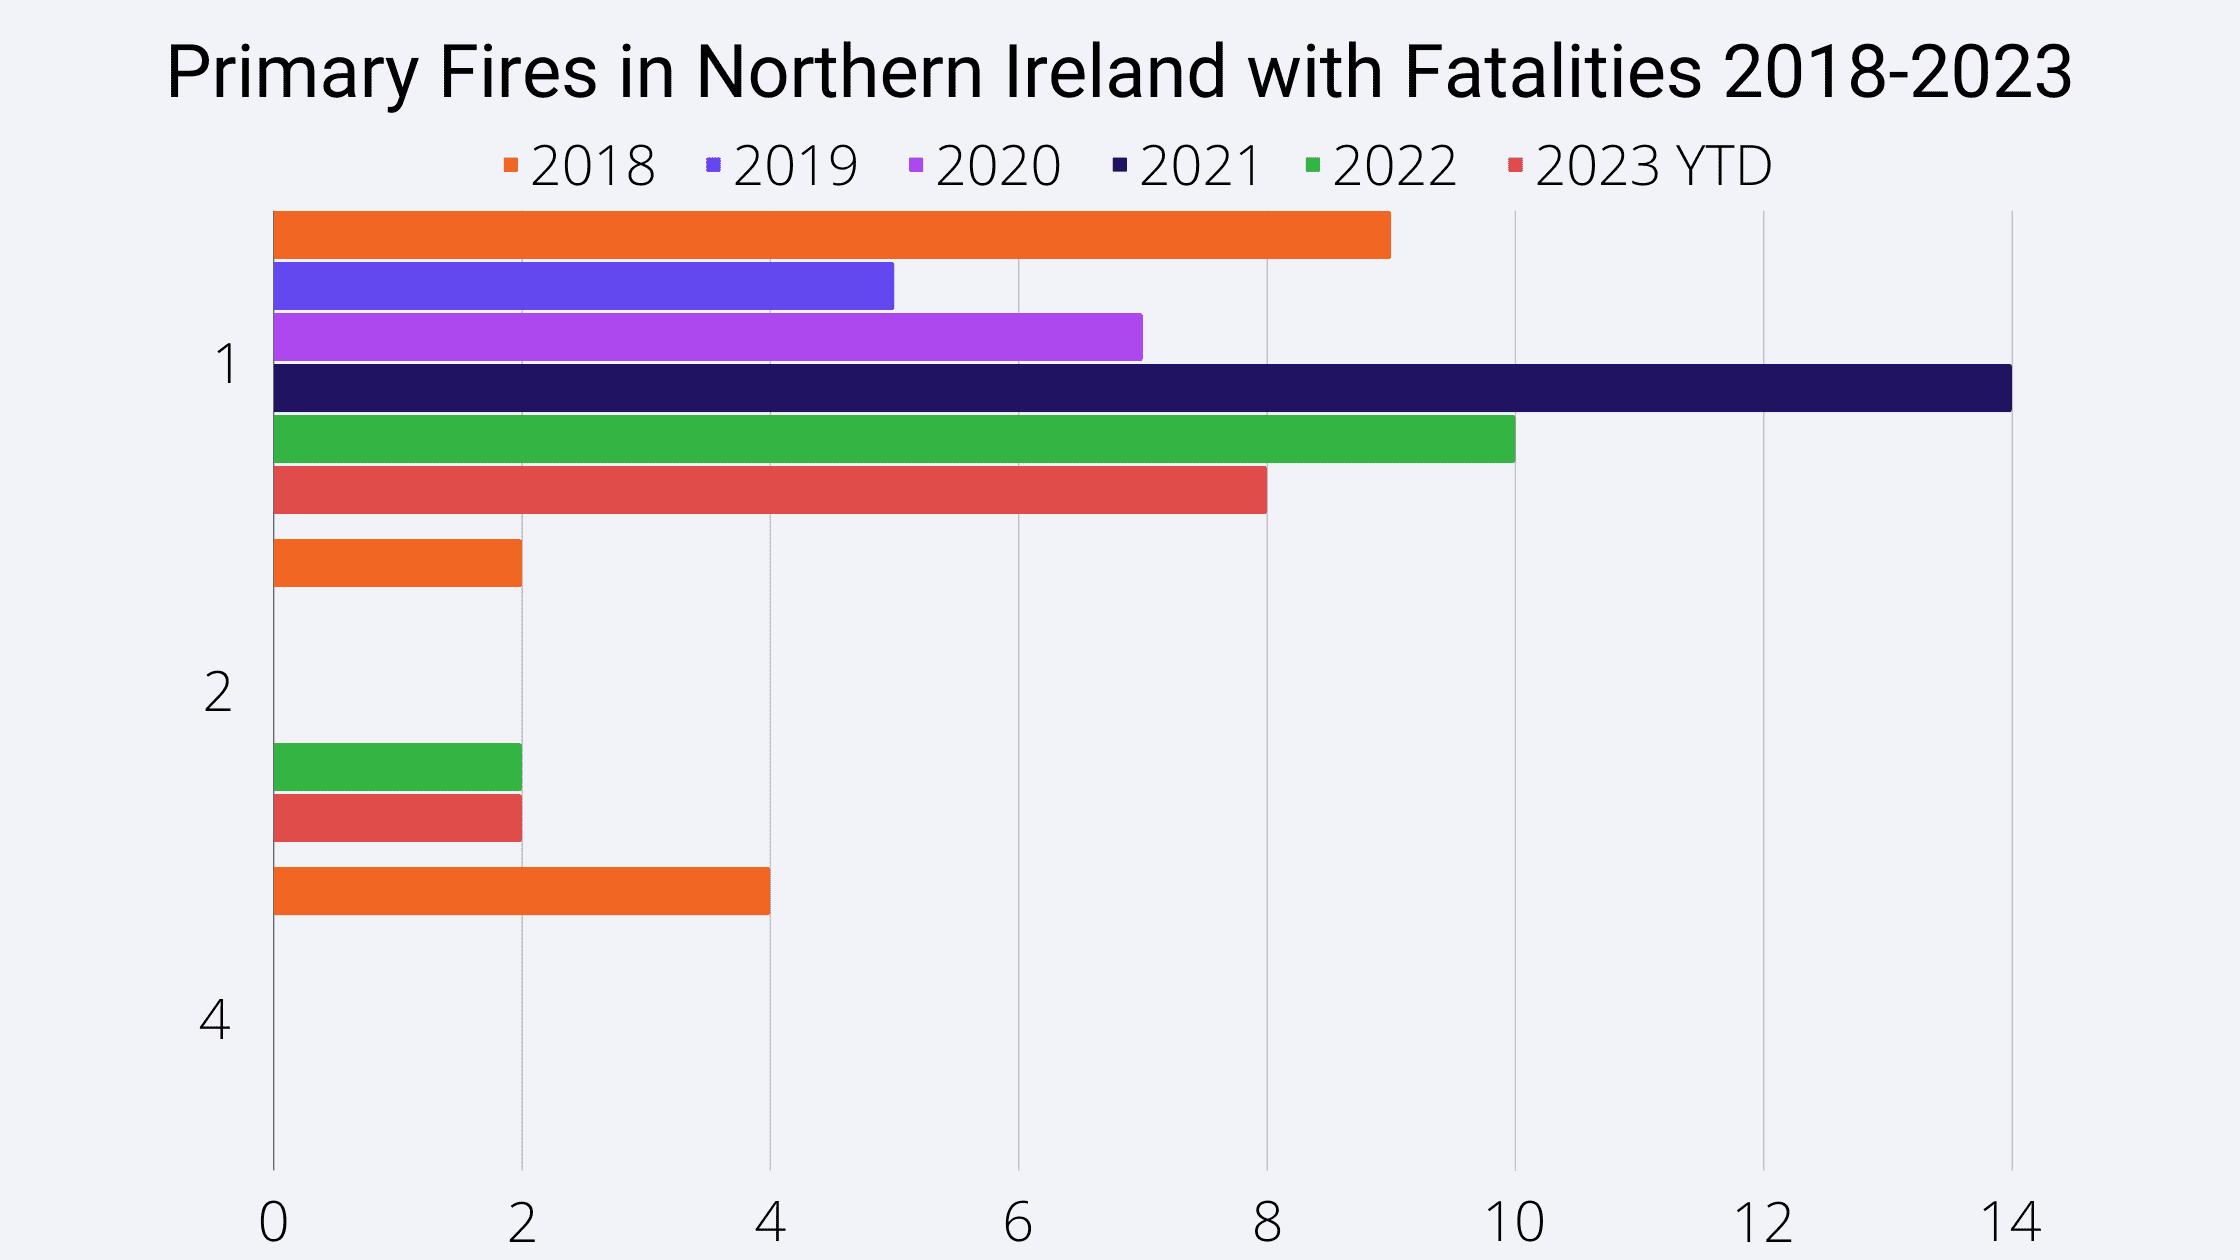 Primary Fires in Northern Ireland with Fatalities 2018-2023 chart